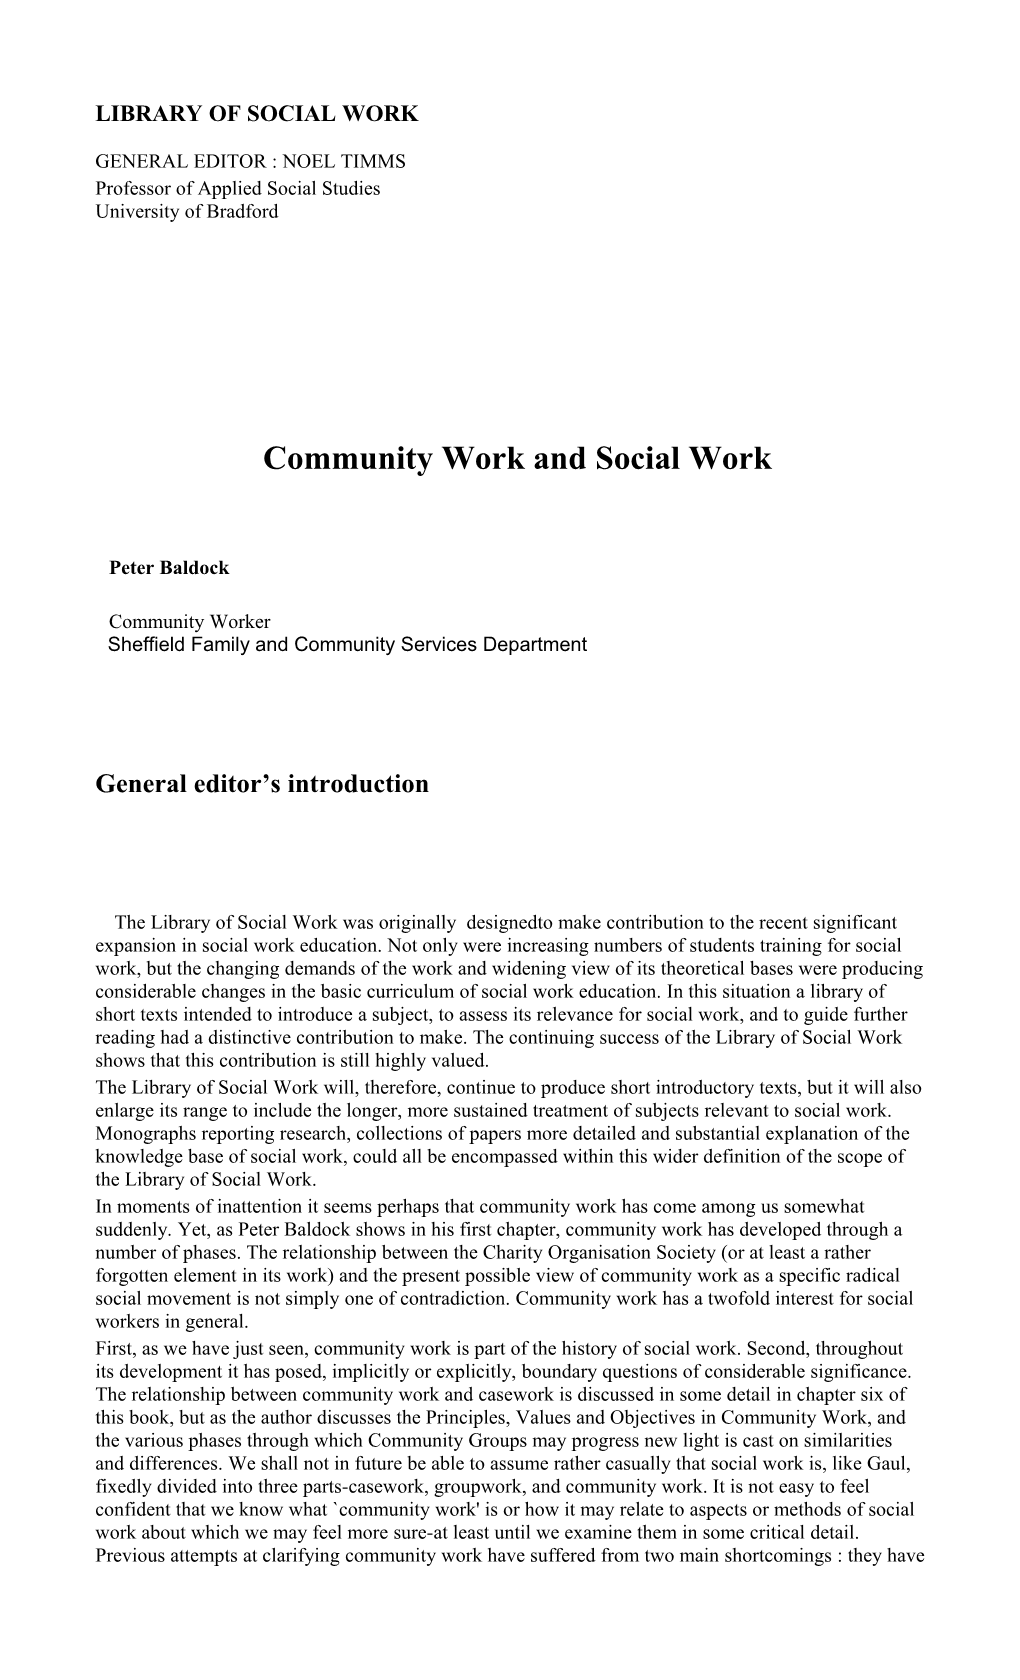 Community Work Is a Type of Activity Practised by People Who Are Employed to Help Others